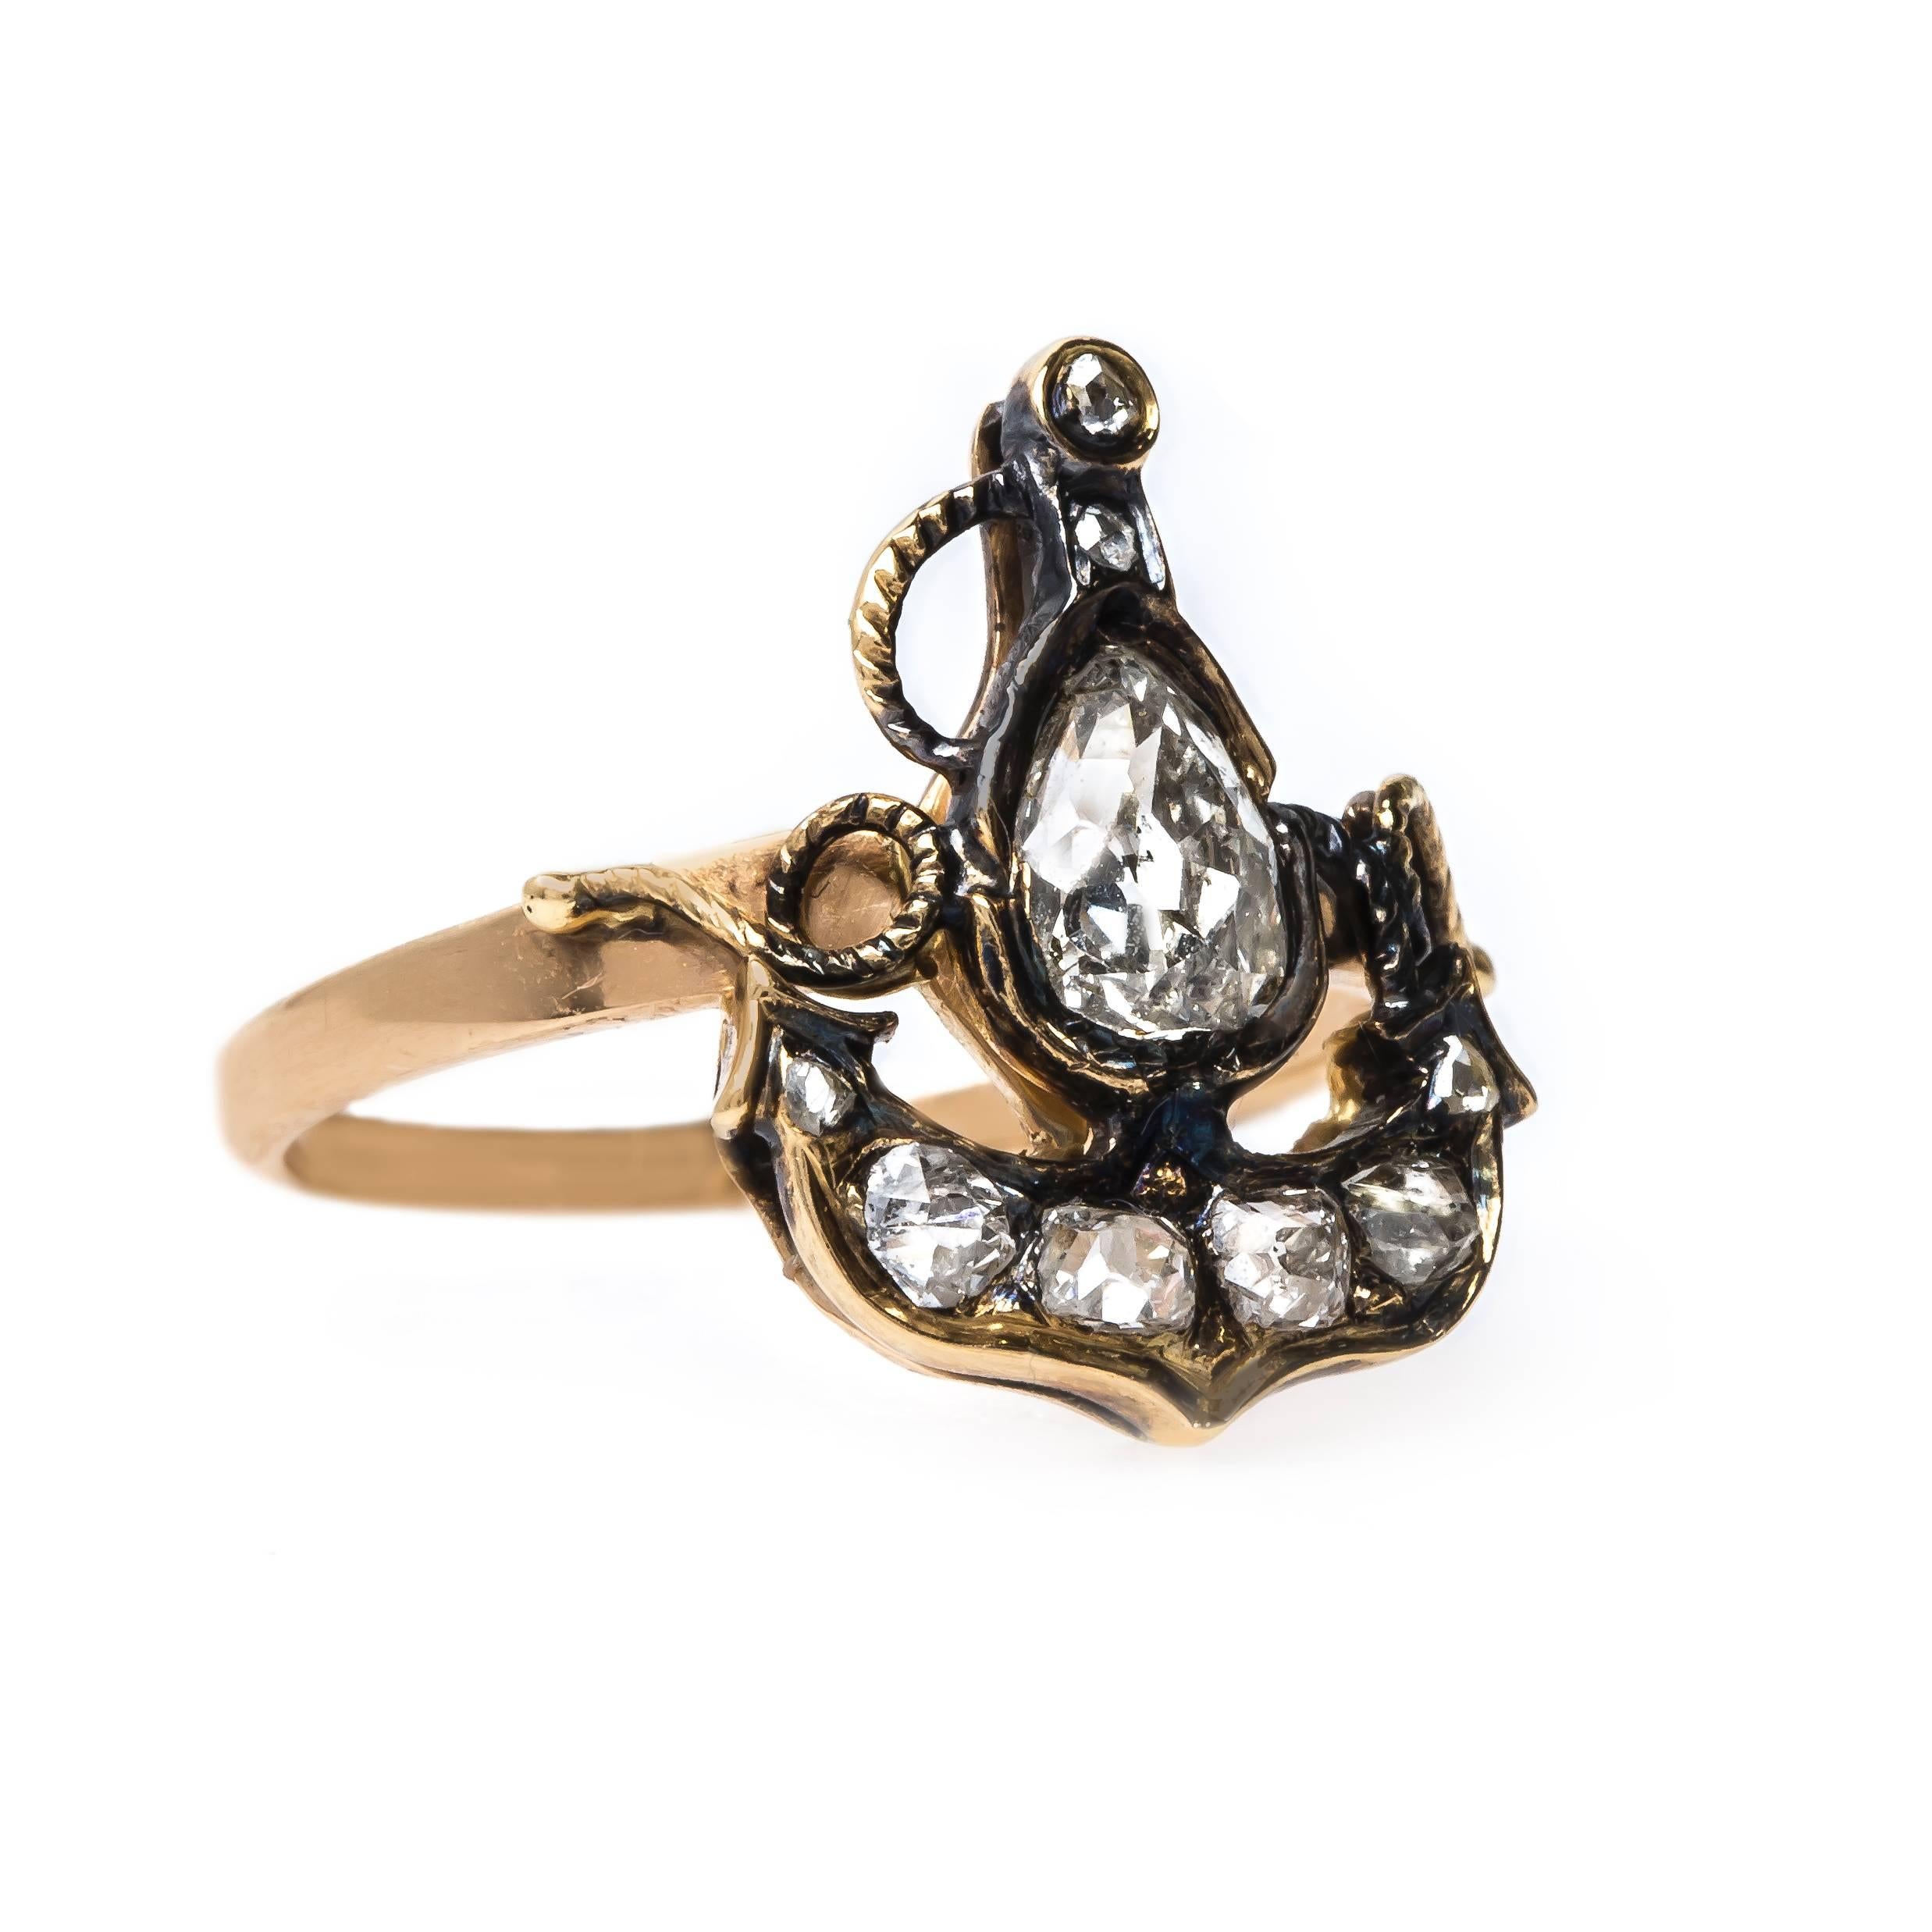 Cunningham is an incredible and authentic Victorian era (circa 1870) 18k yellow gold ring that started its life as an antique stick pin in the shape of an anchor. The nautical themed ring centers a bezel set antique Pear Cut diamond totaling